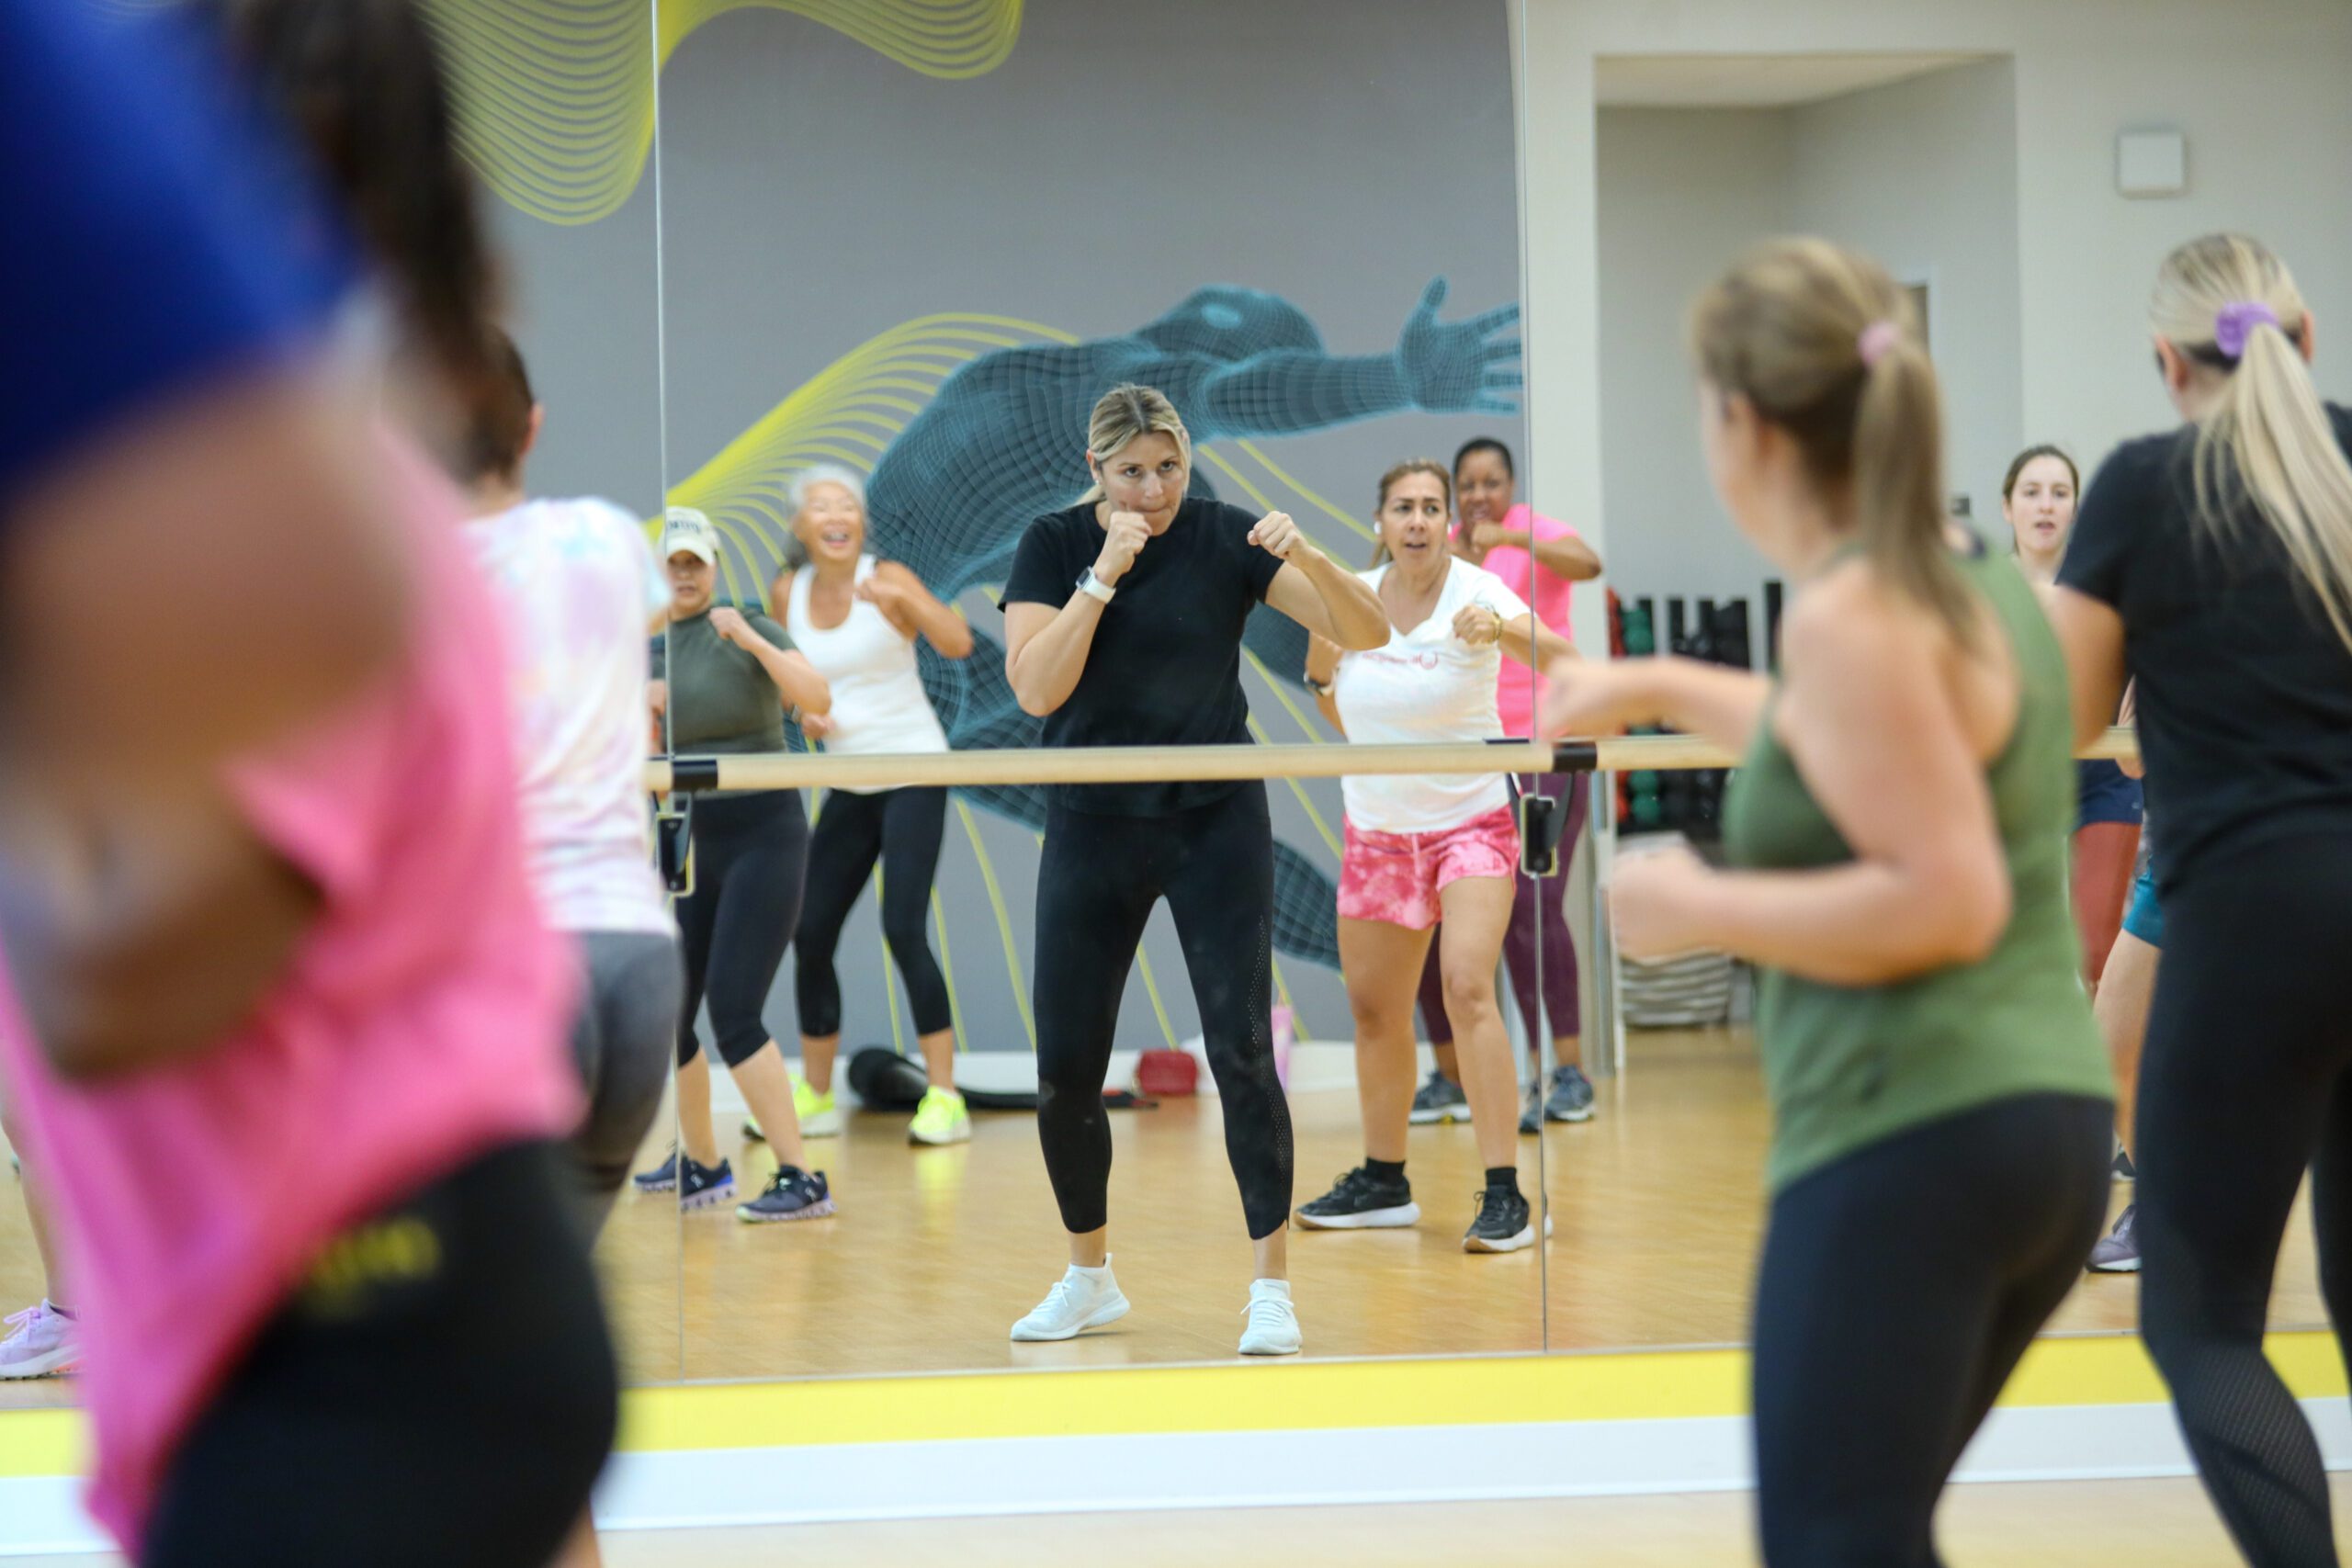 Les Mills - Information + Benefits - Classes and Tips